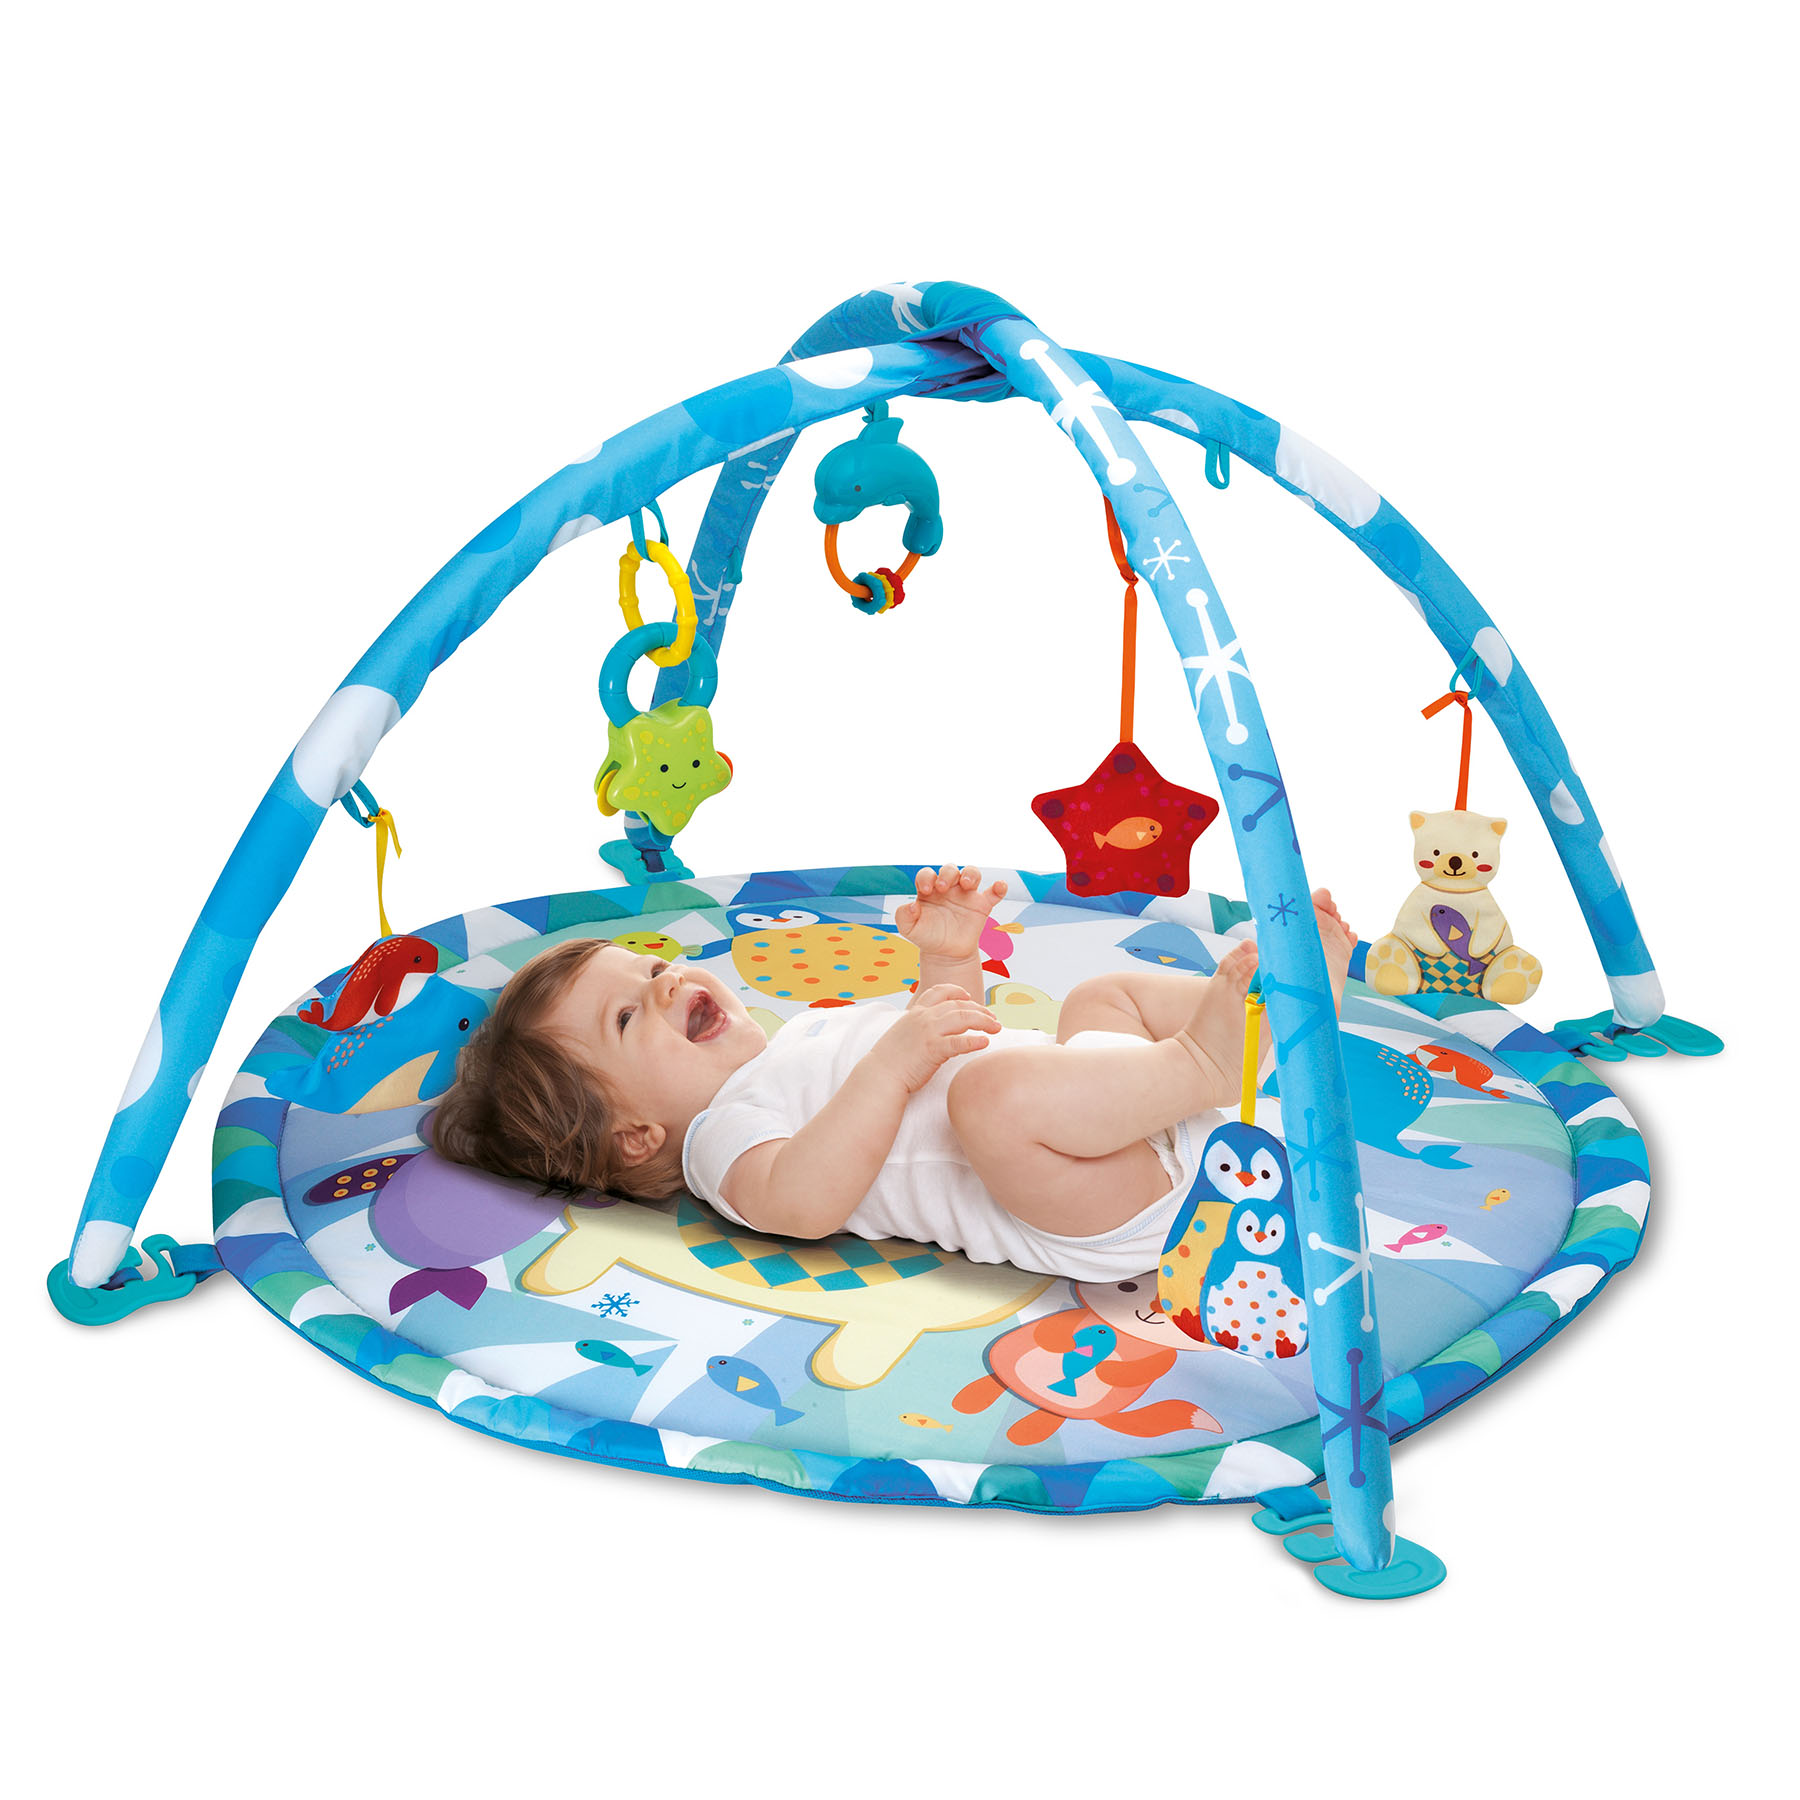 Little Virtuoso Neptune's Infant Playmat  With Lights, Sounds and Music  (Newborn to 2 Years) - image 2 of 6